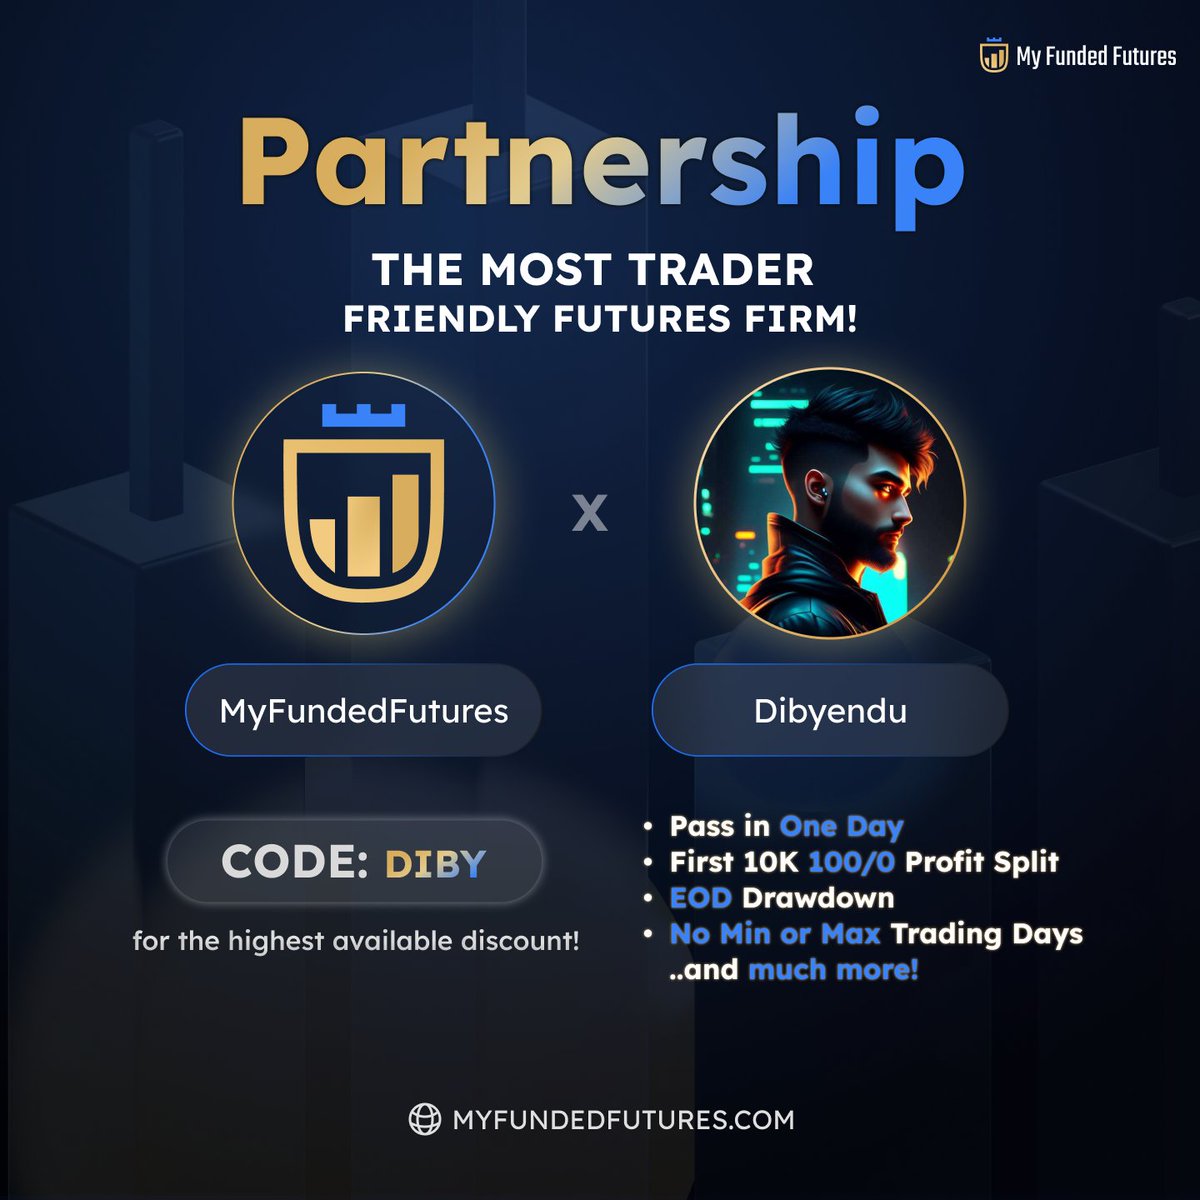 🚨Partnership Giveaway Alert 🚨 

🔥🎁3x Starter Plan Accounts🎁🔥

Follow all of the steps to ensure you participate!

Instructions:

🔳 Follow 

@Diby_ICT
@MyFundedFutures

🔳 Like and Retweet this post.  

🔳 Tag 3 friends to participate. 

🔳 Create an account from here…